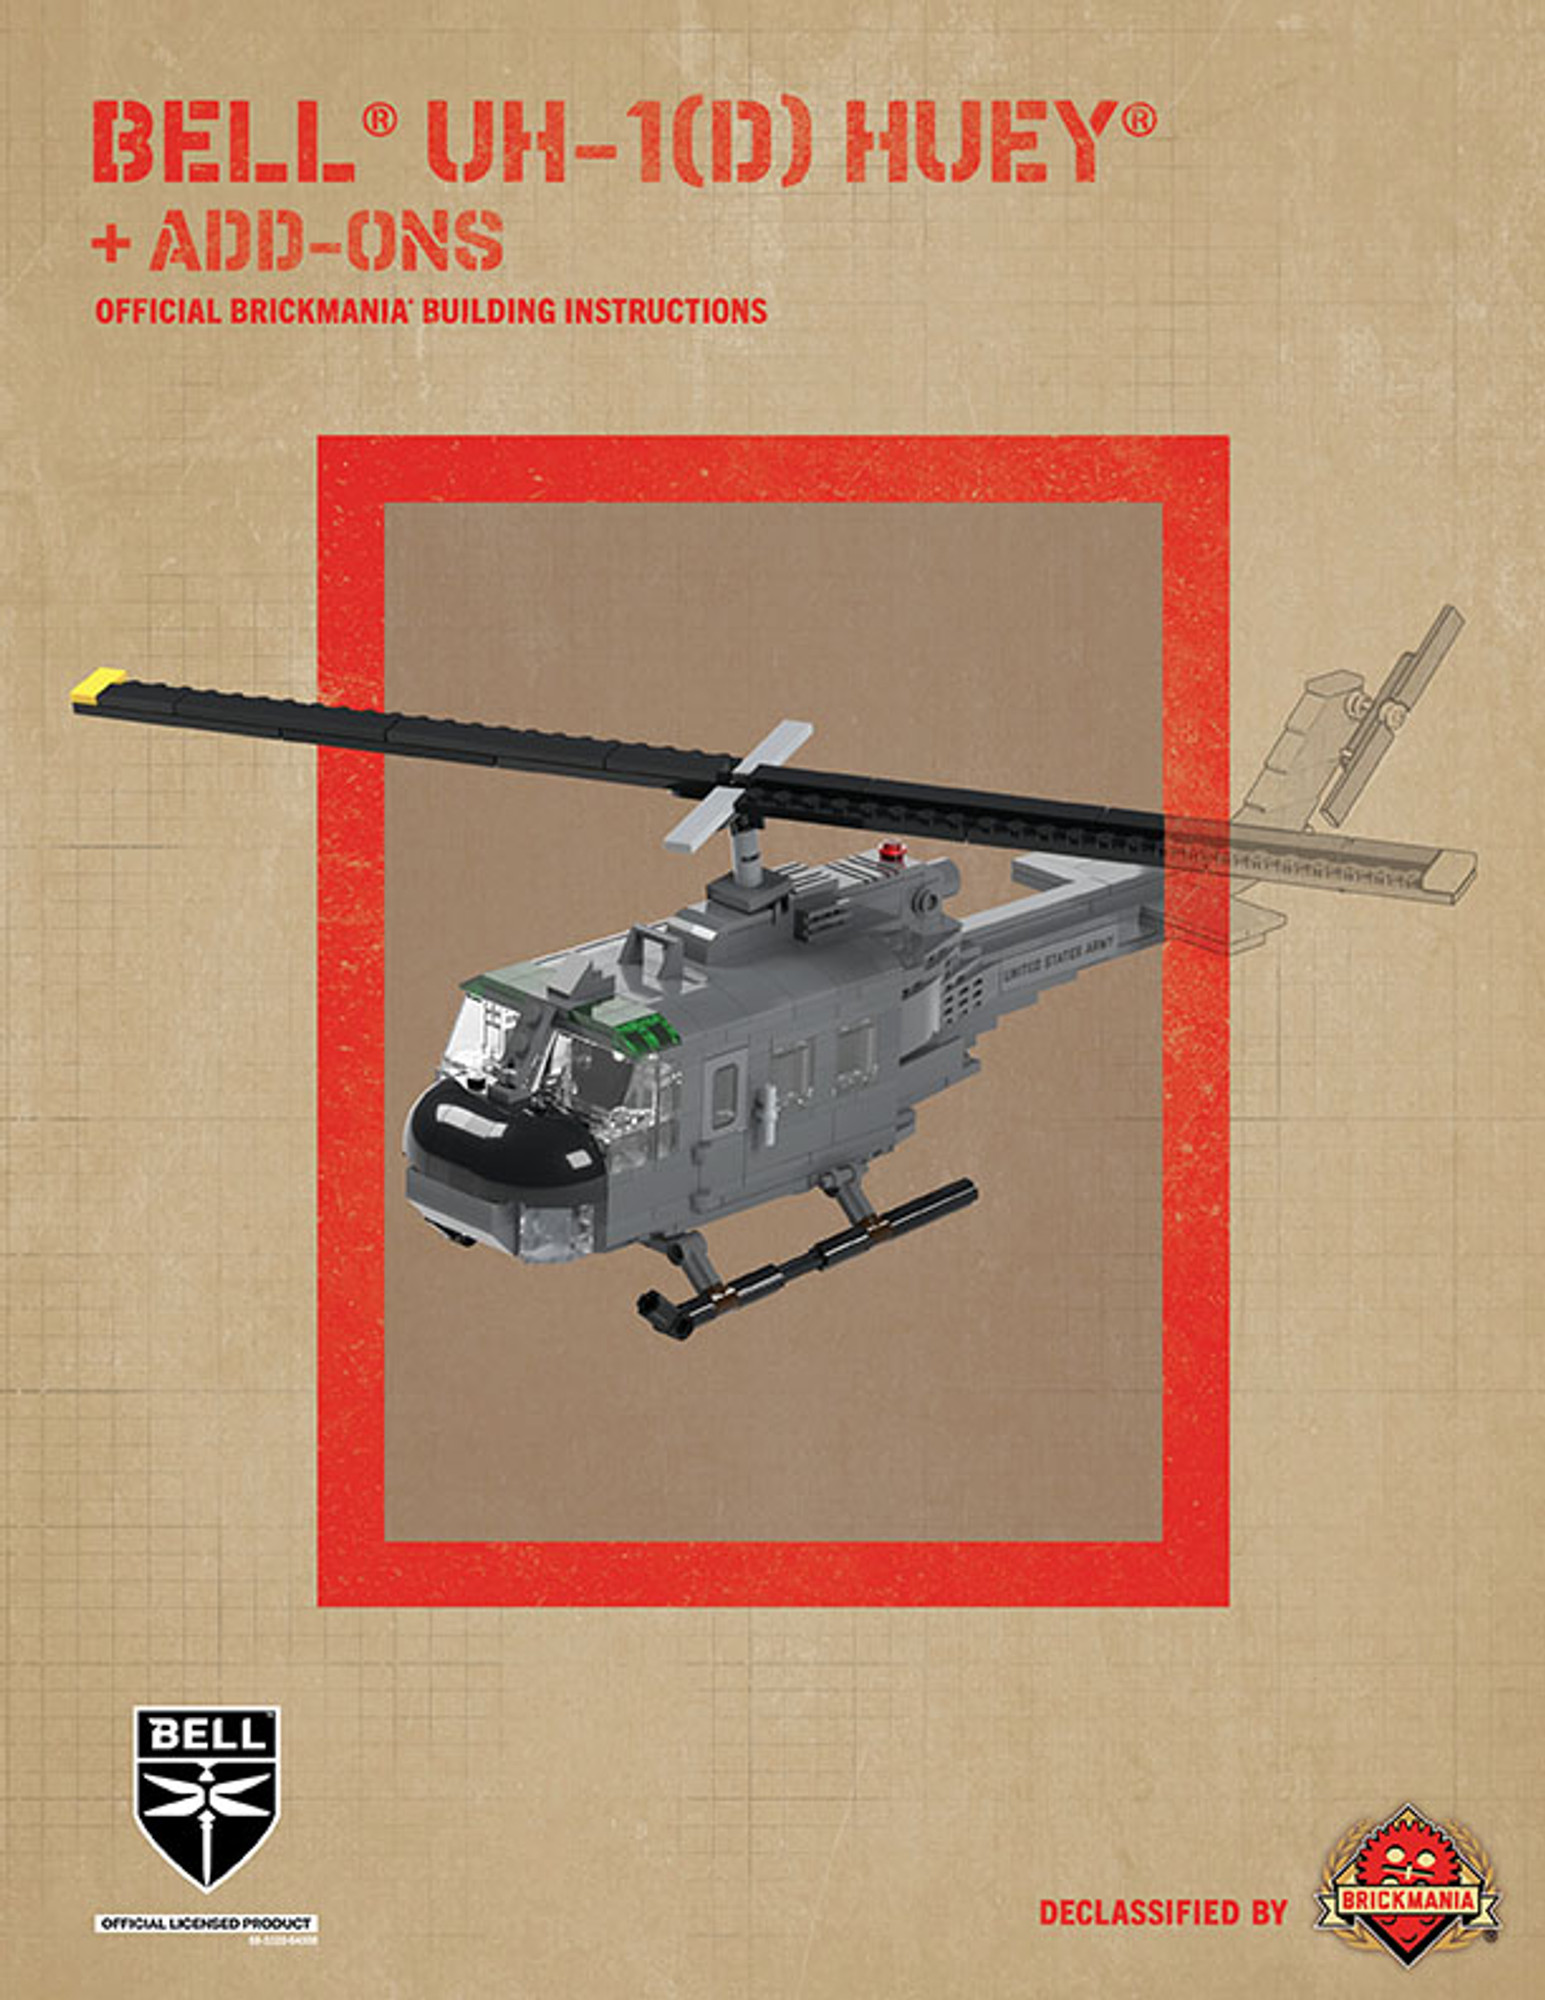 Bell® UH-1(D) Huey® + Add-Ons - Digital Building Instructions